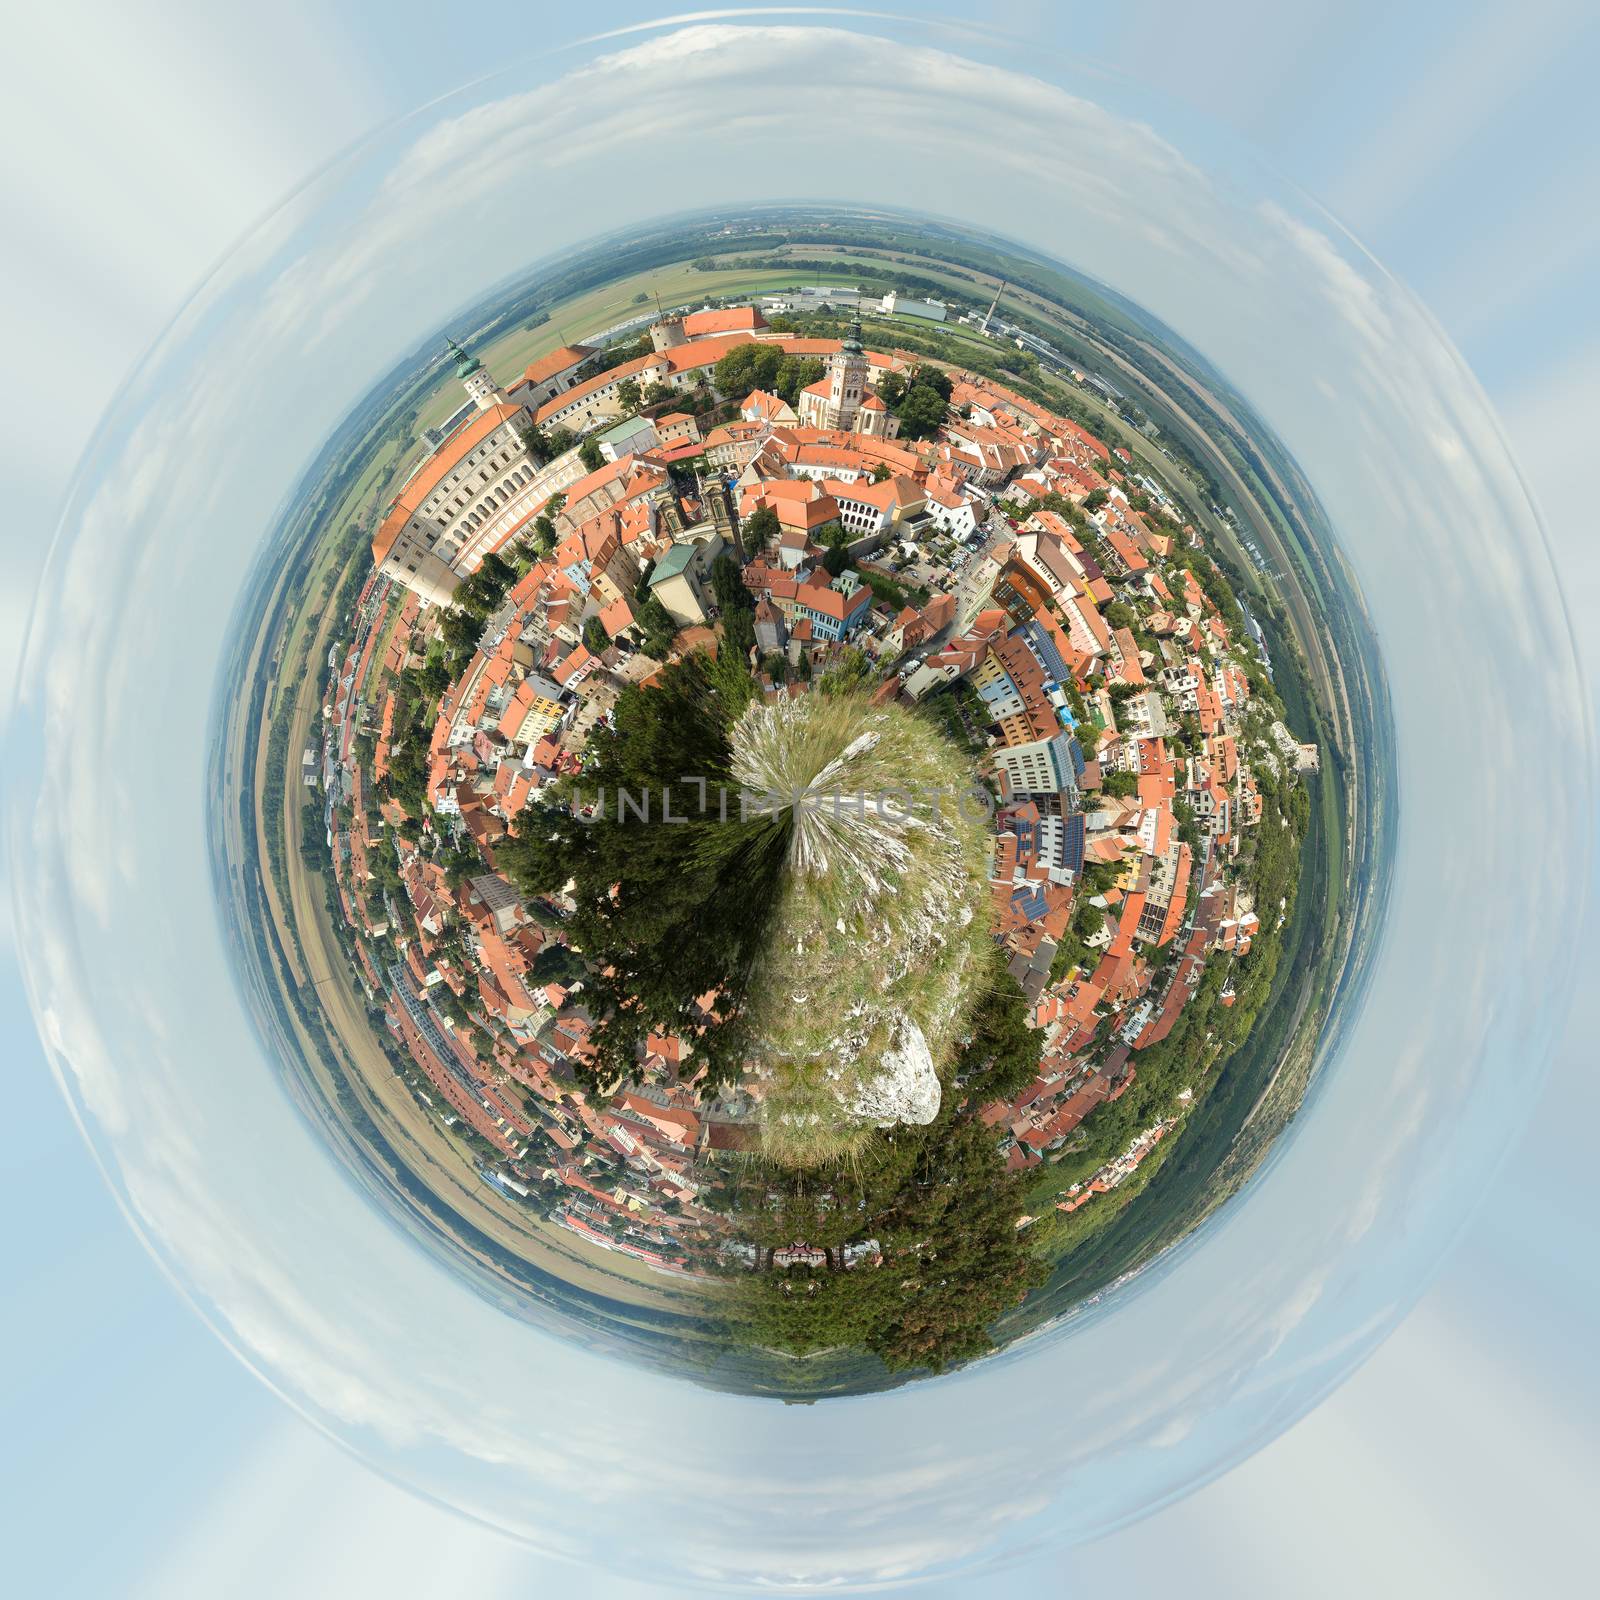 Planet of Mikulov, South Moravia, in the Czech Republic. Little planet with european city, concept. Tiny planet projection